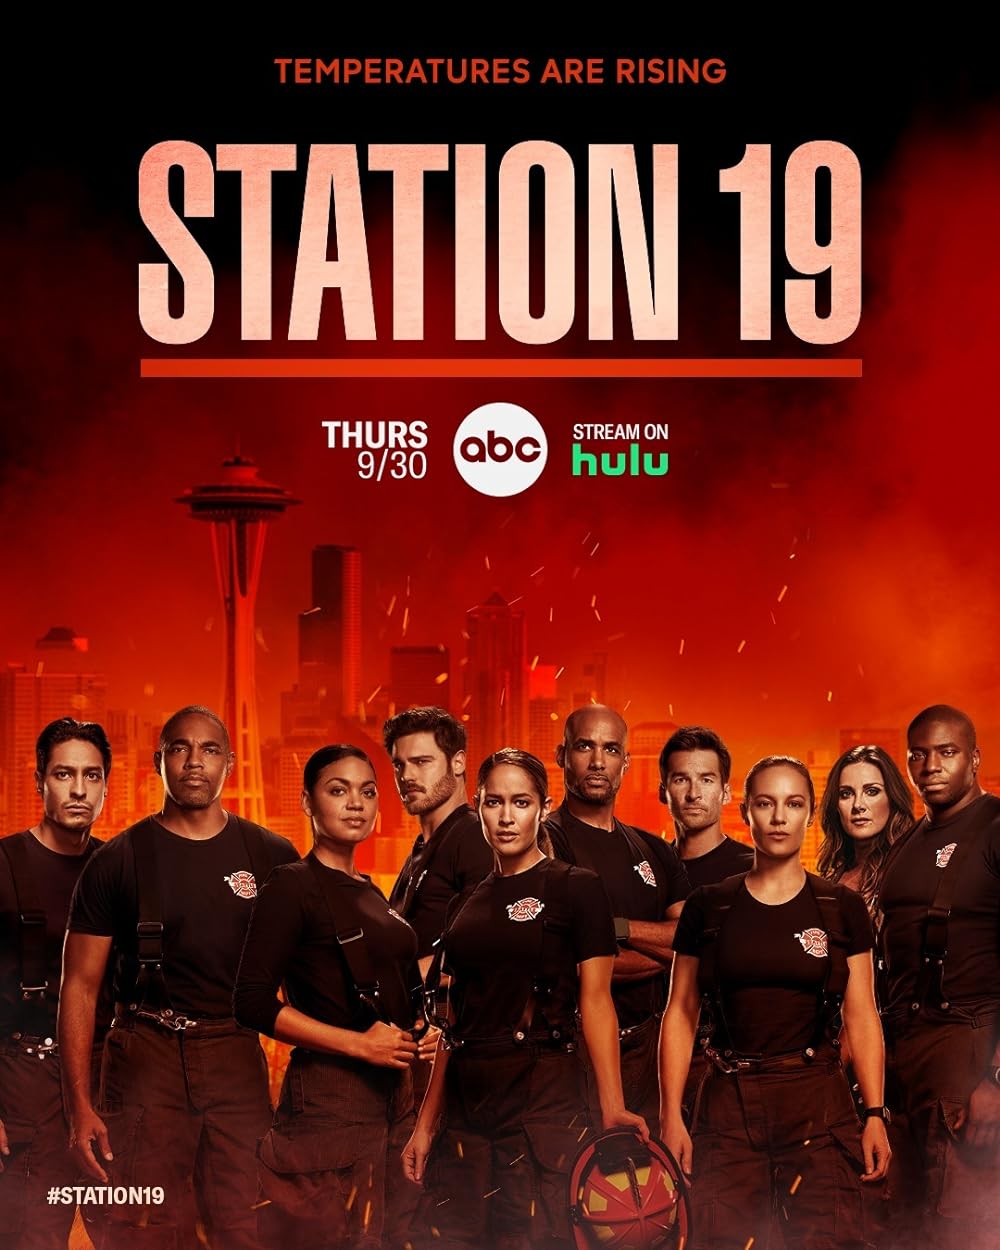 New Episode: Station 19 Season 7 Episode 6 (S07E06) - With So Little to Be Sure Of